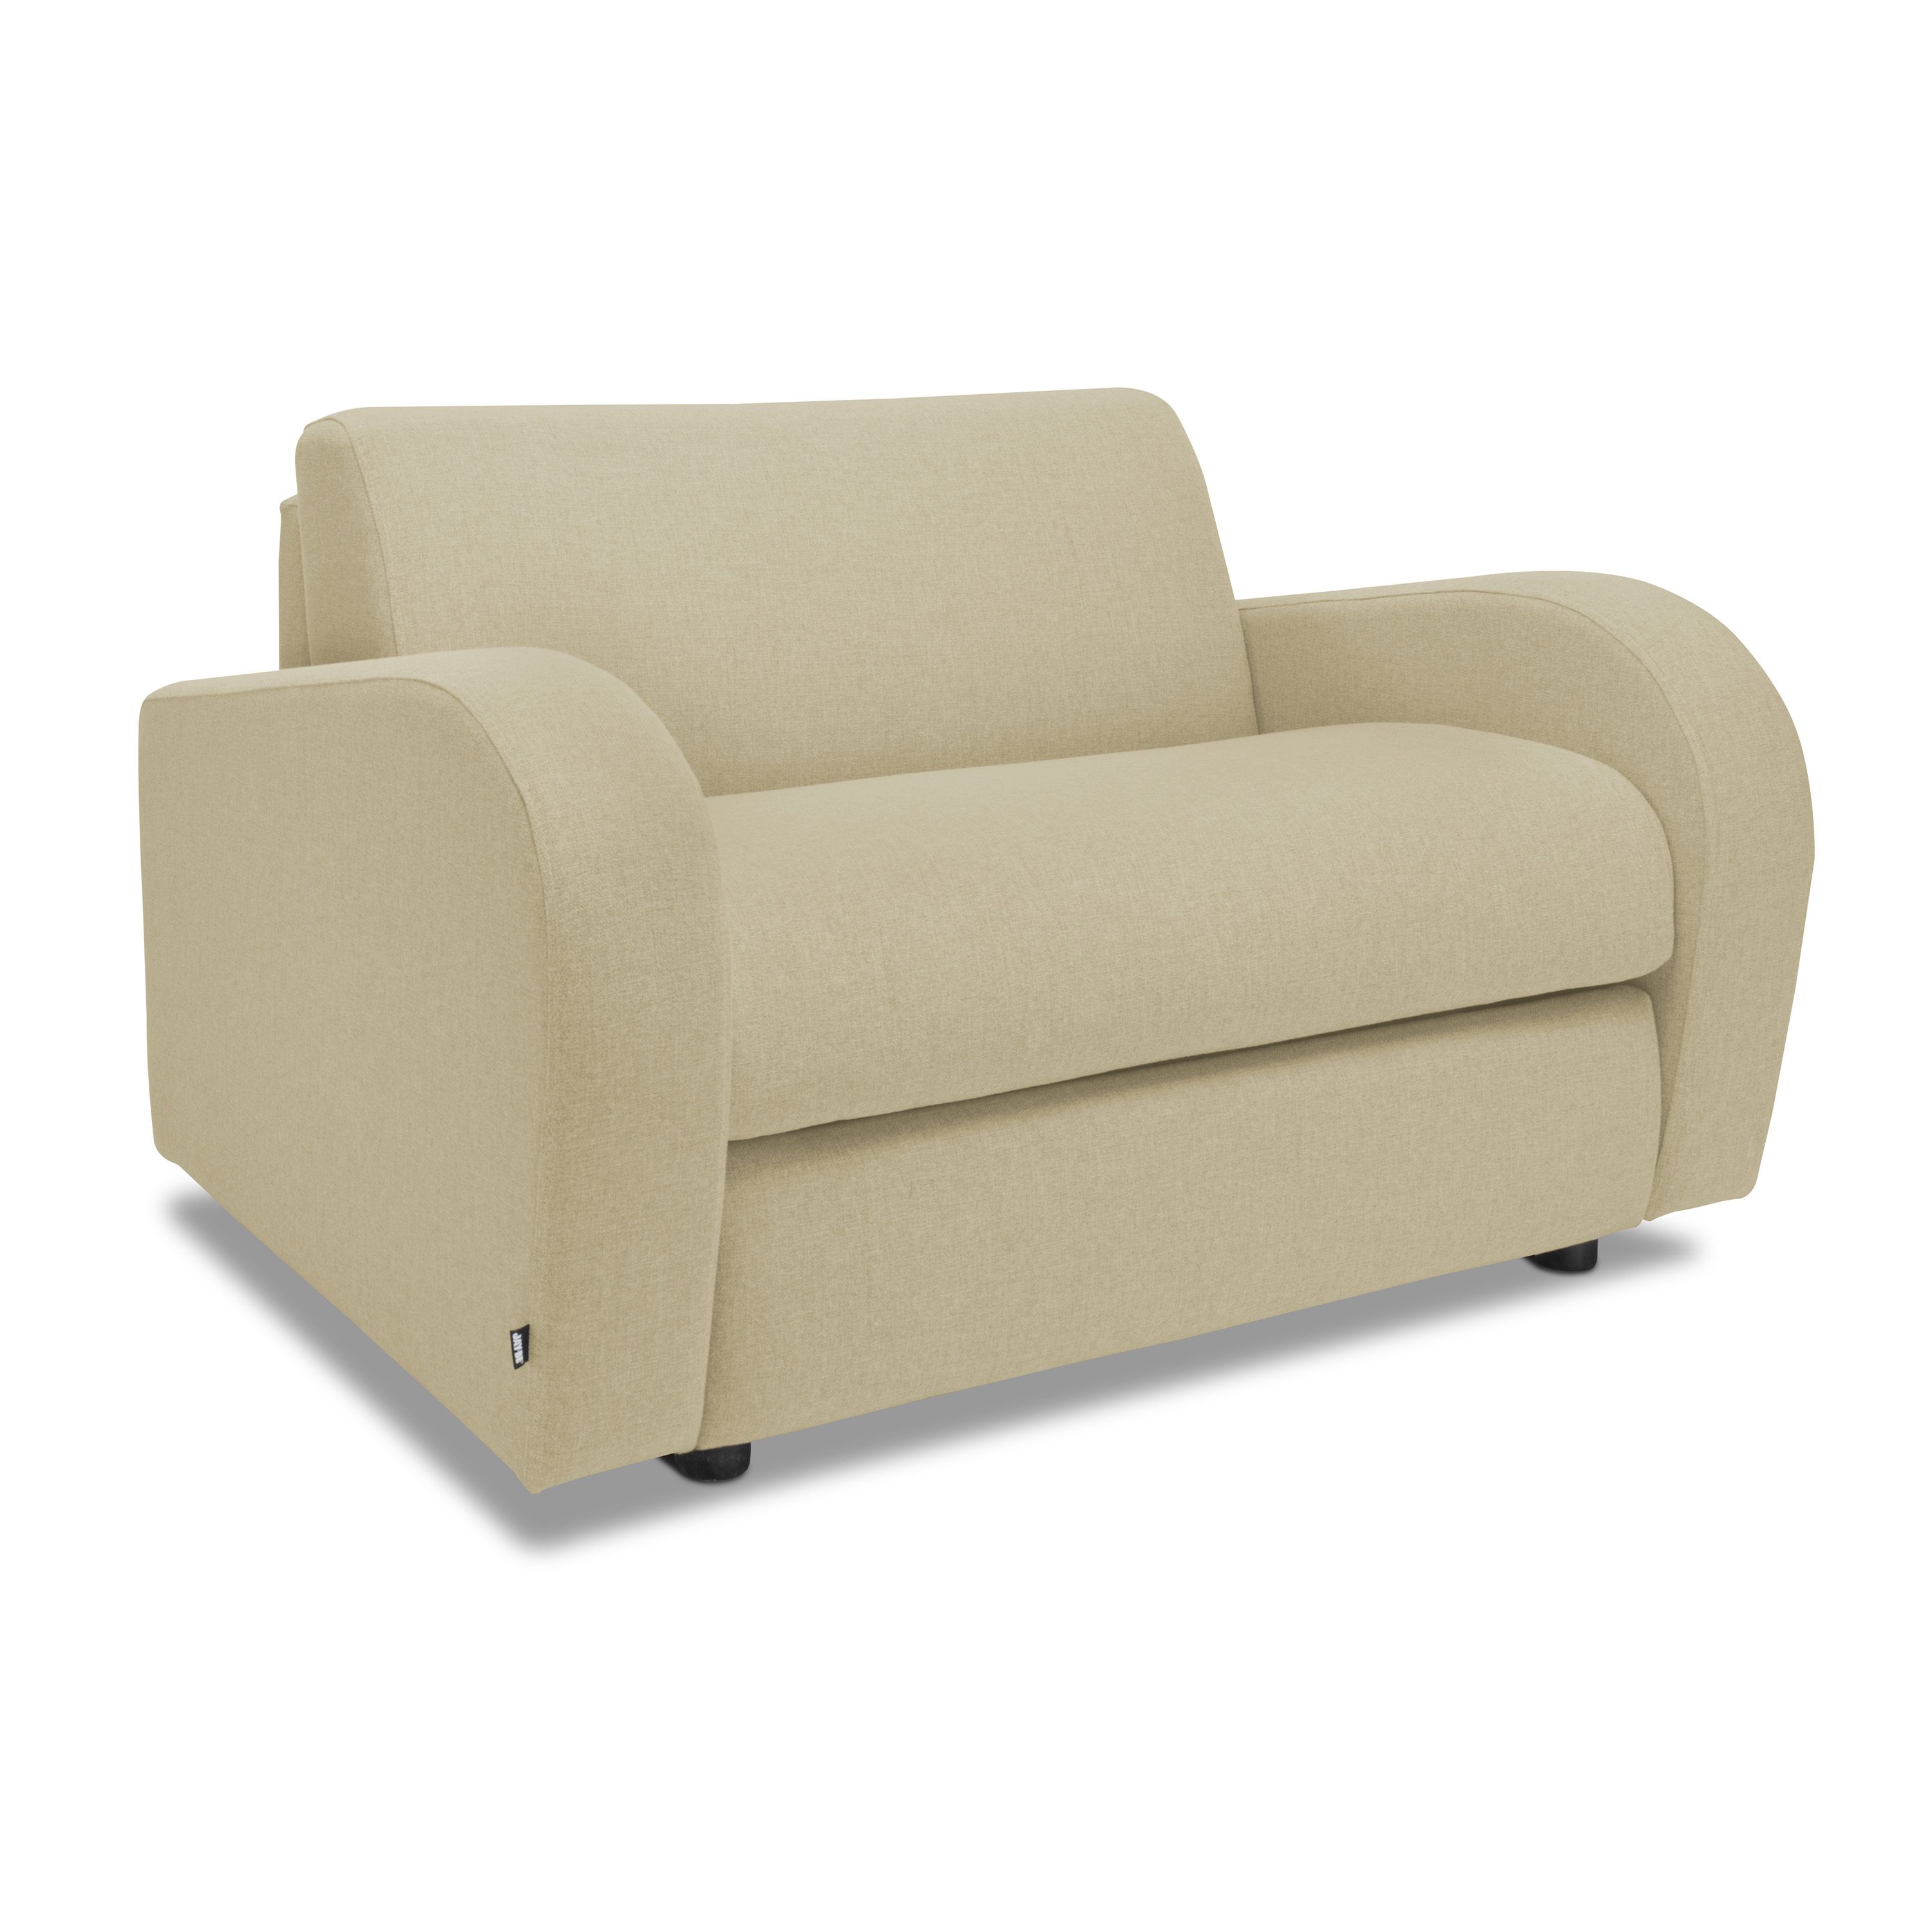 Jay-Be Retro Chair Sofa Bed